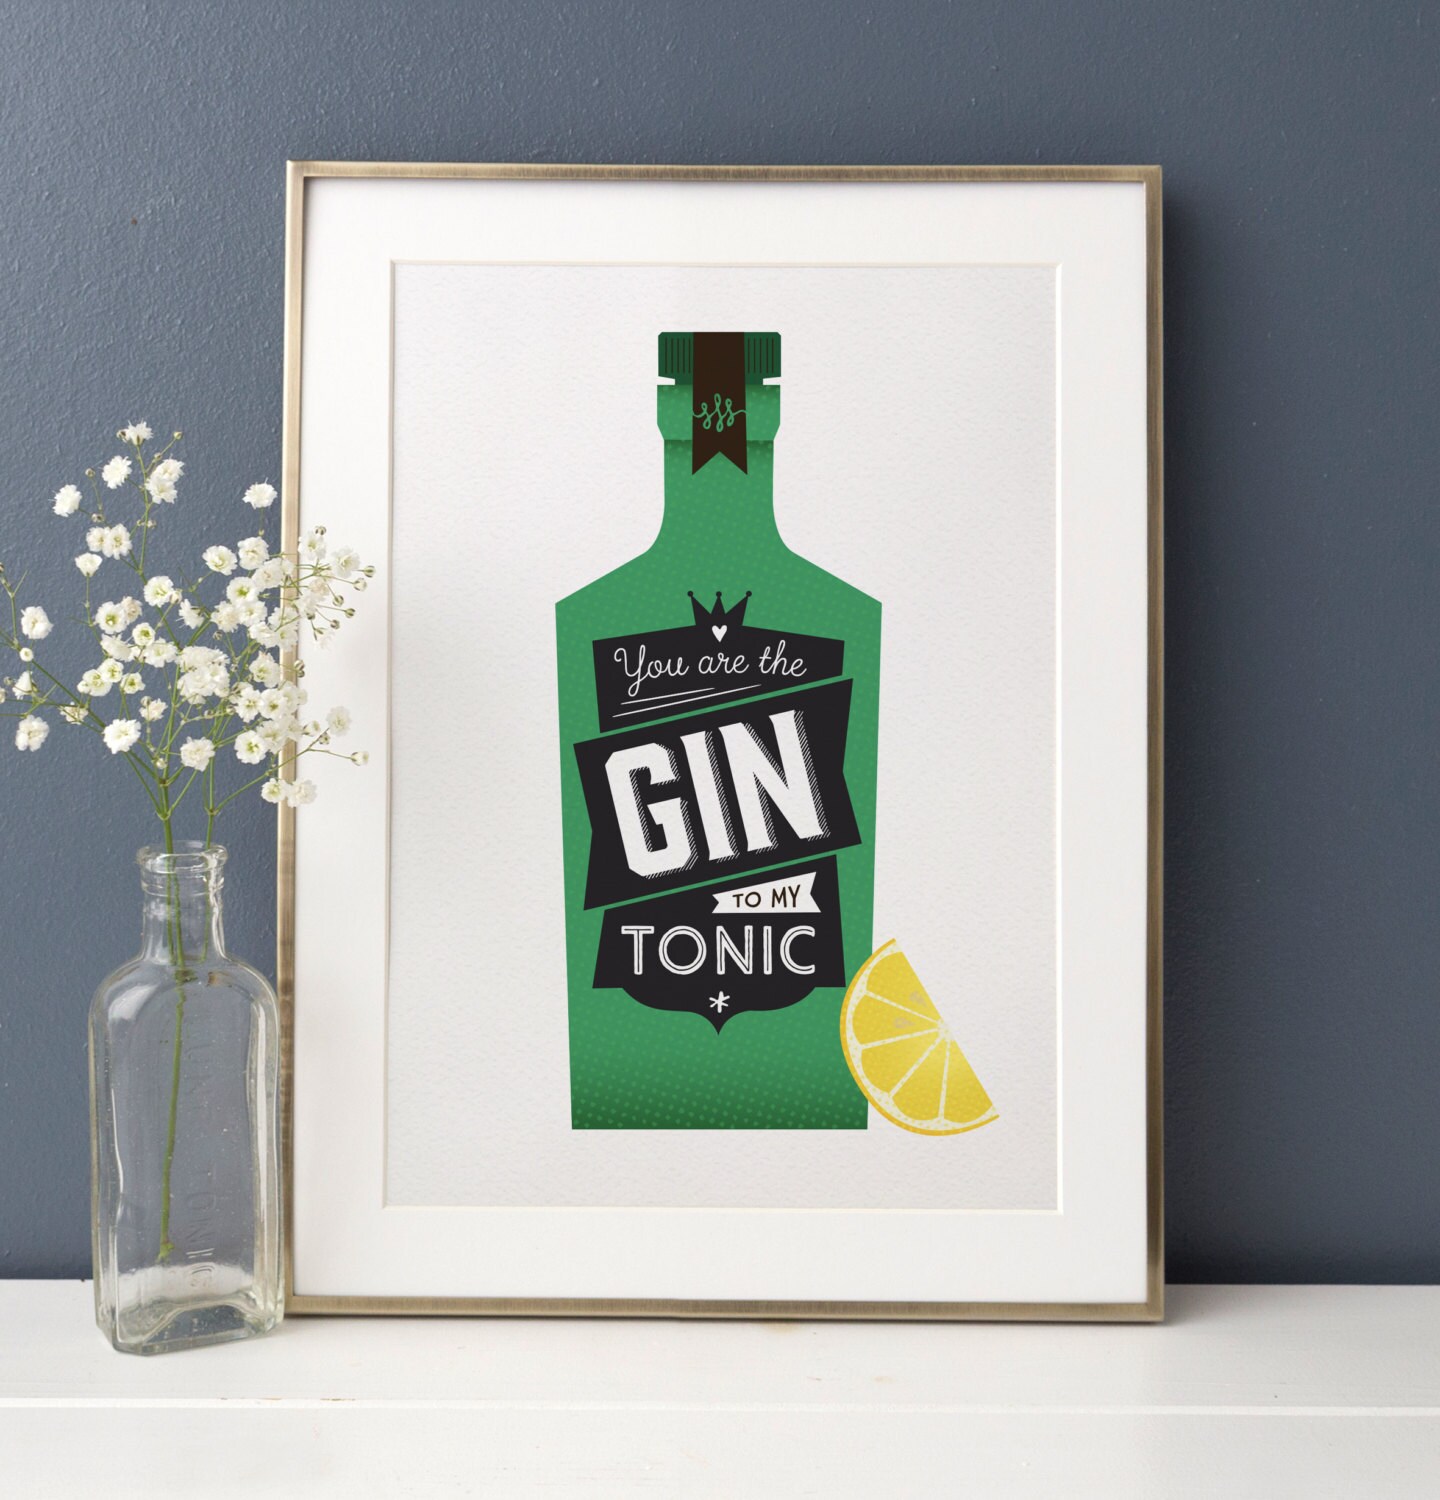 Print, Gift, the Vintage Etsy Gin for Retro & to - My Her Design, Kitchen Poster, You Cocktail Print, Tonic Tonic, Gin Gift Gin Are Anniversary